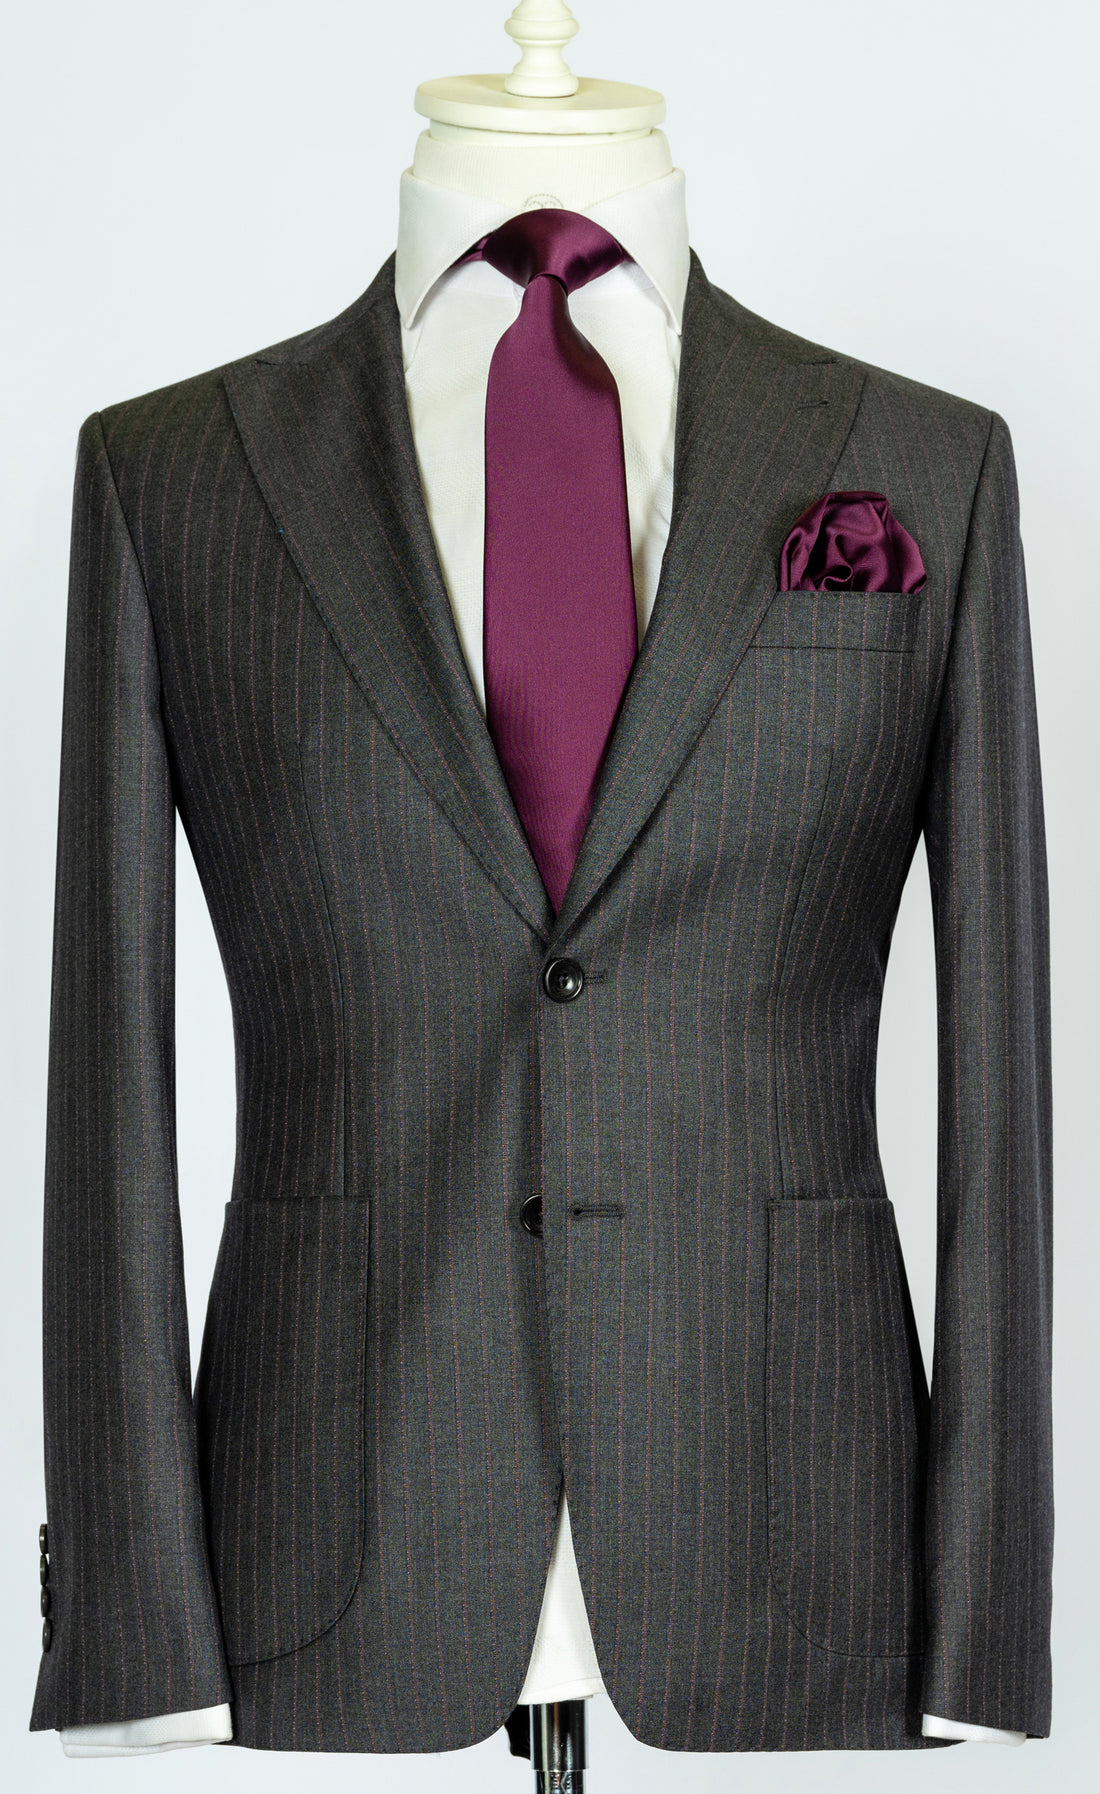 Vitale Barberis - Mid grey with fuchsia pinstripes 2-piece slim fit suit with patch pockets